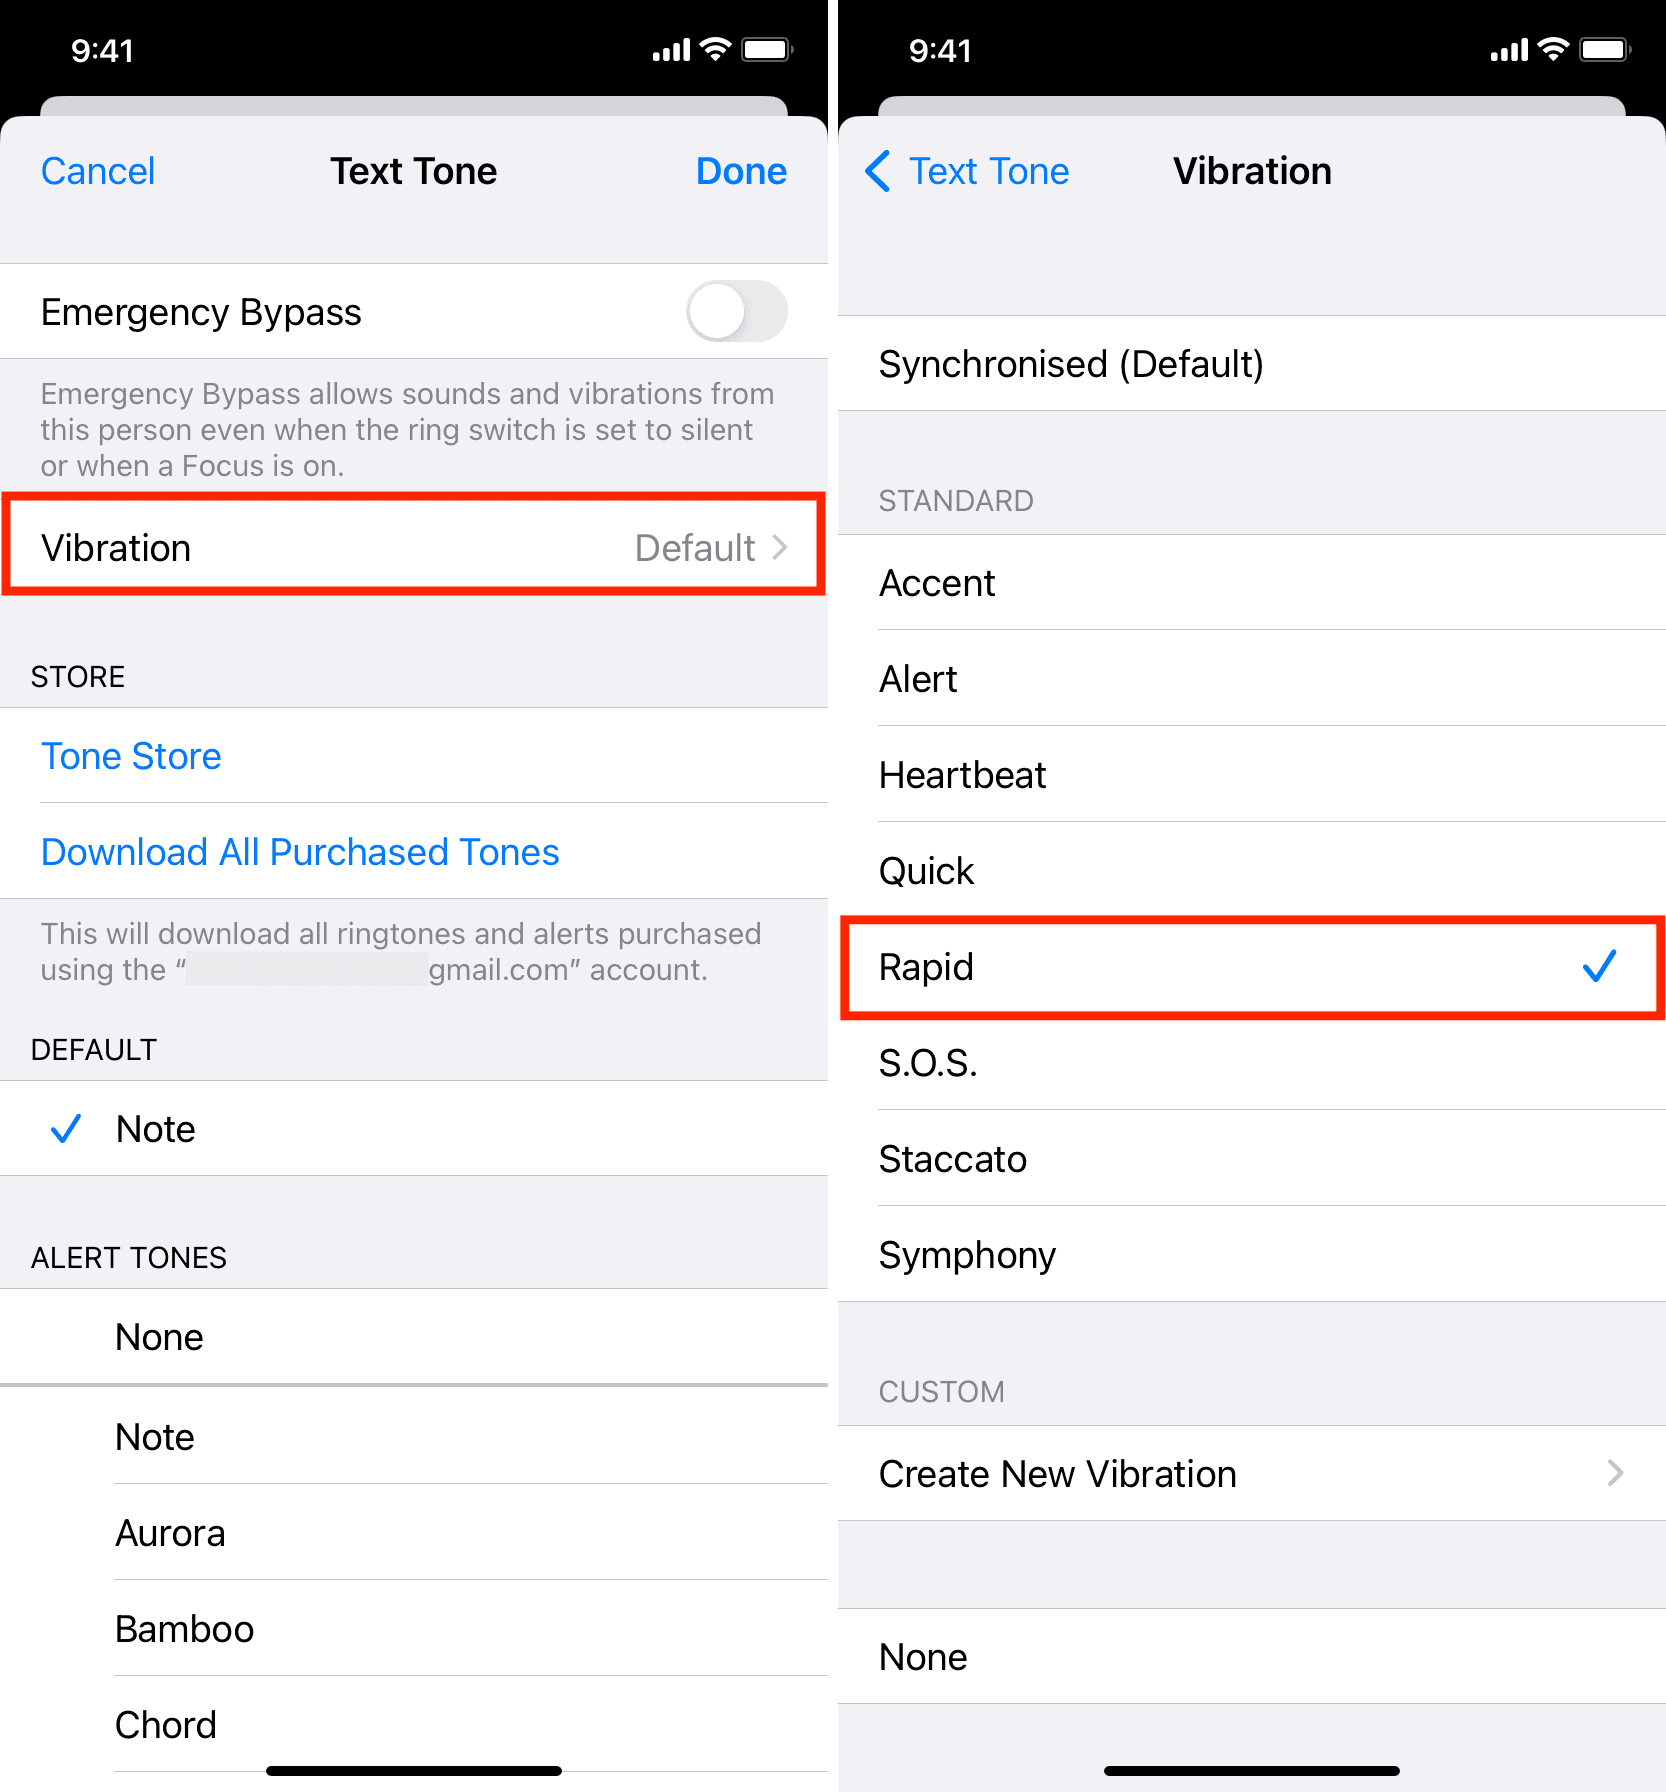 Set special vibration text tone for a contact on iPhone